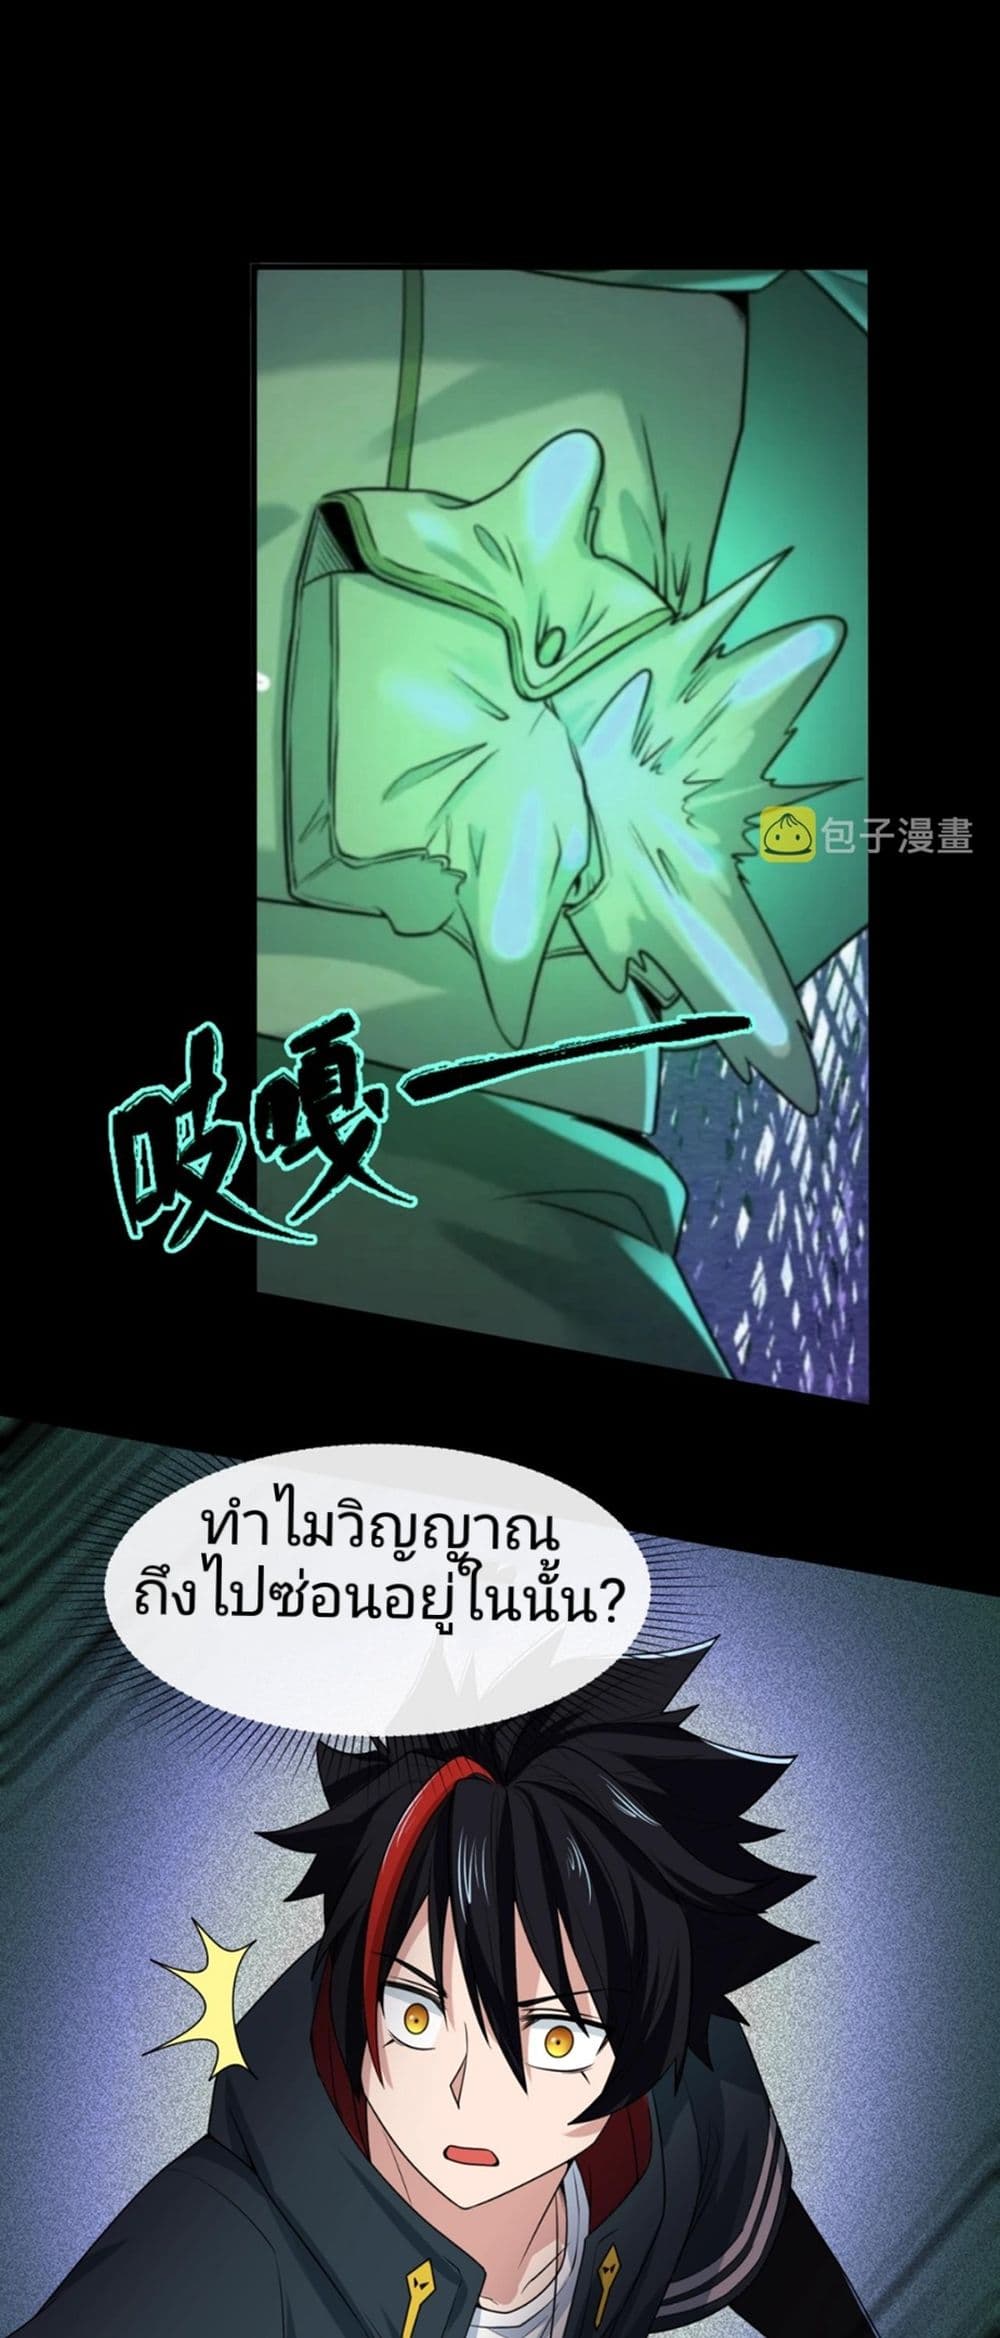 The Age of Ghost Spirits à¸à¸­à¸à¸à¸µà¹ 7 (2)